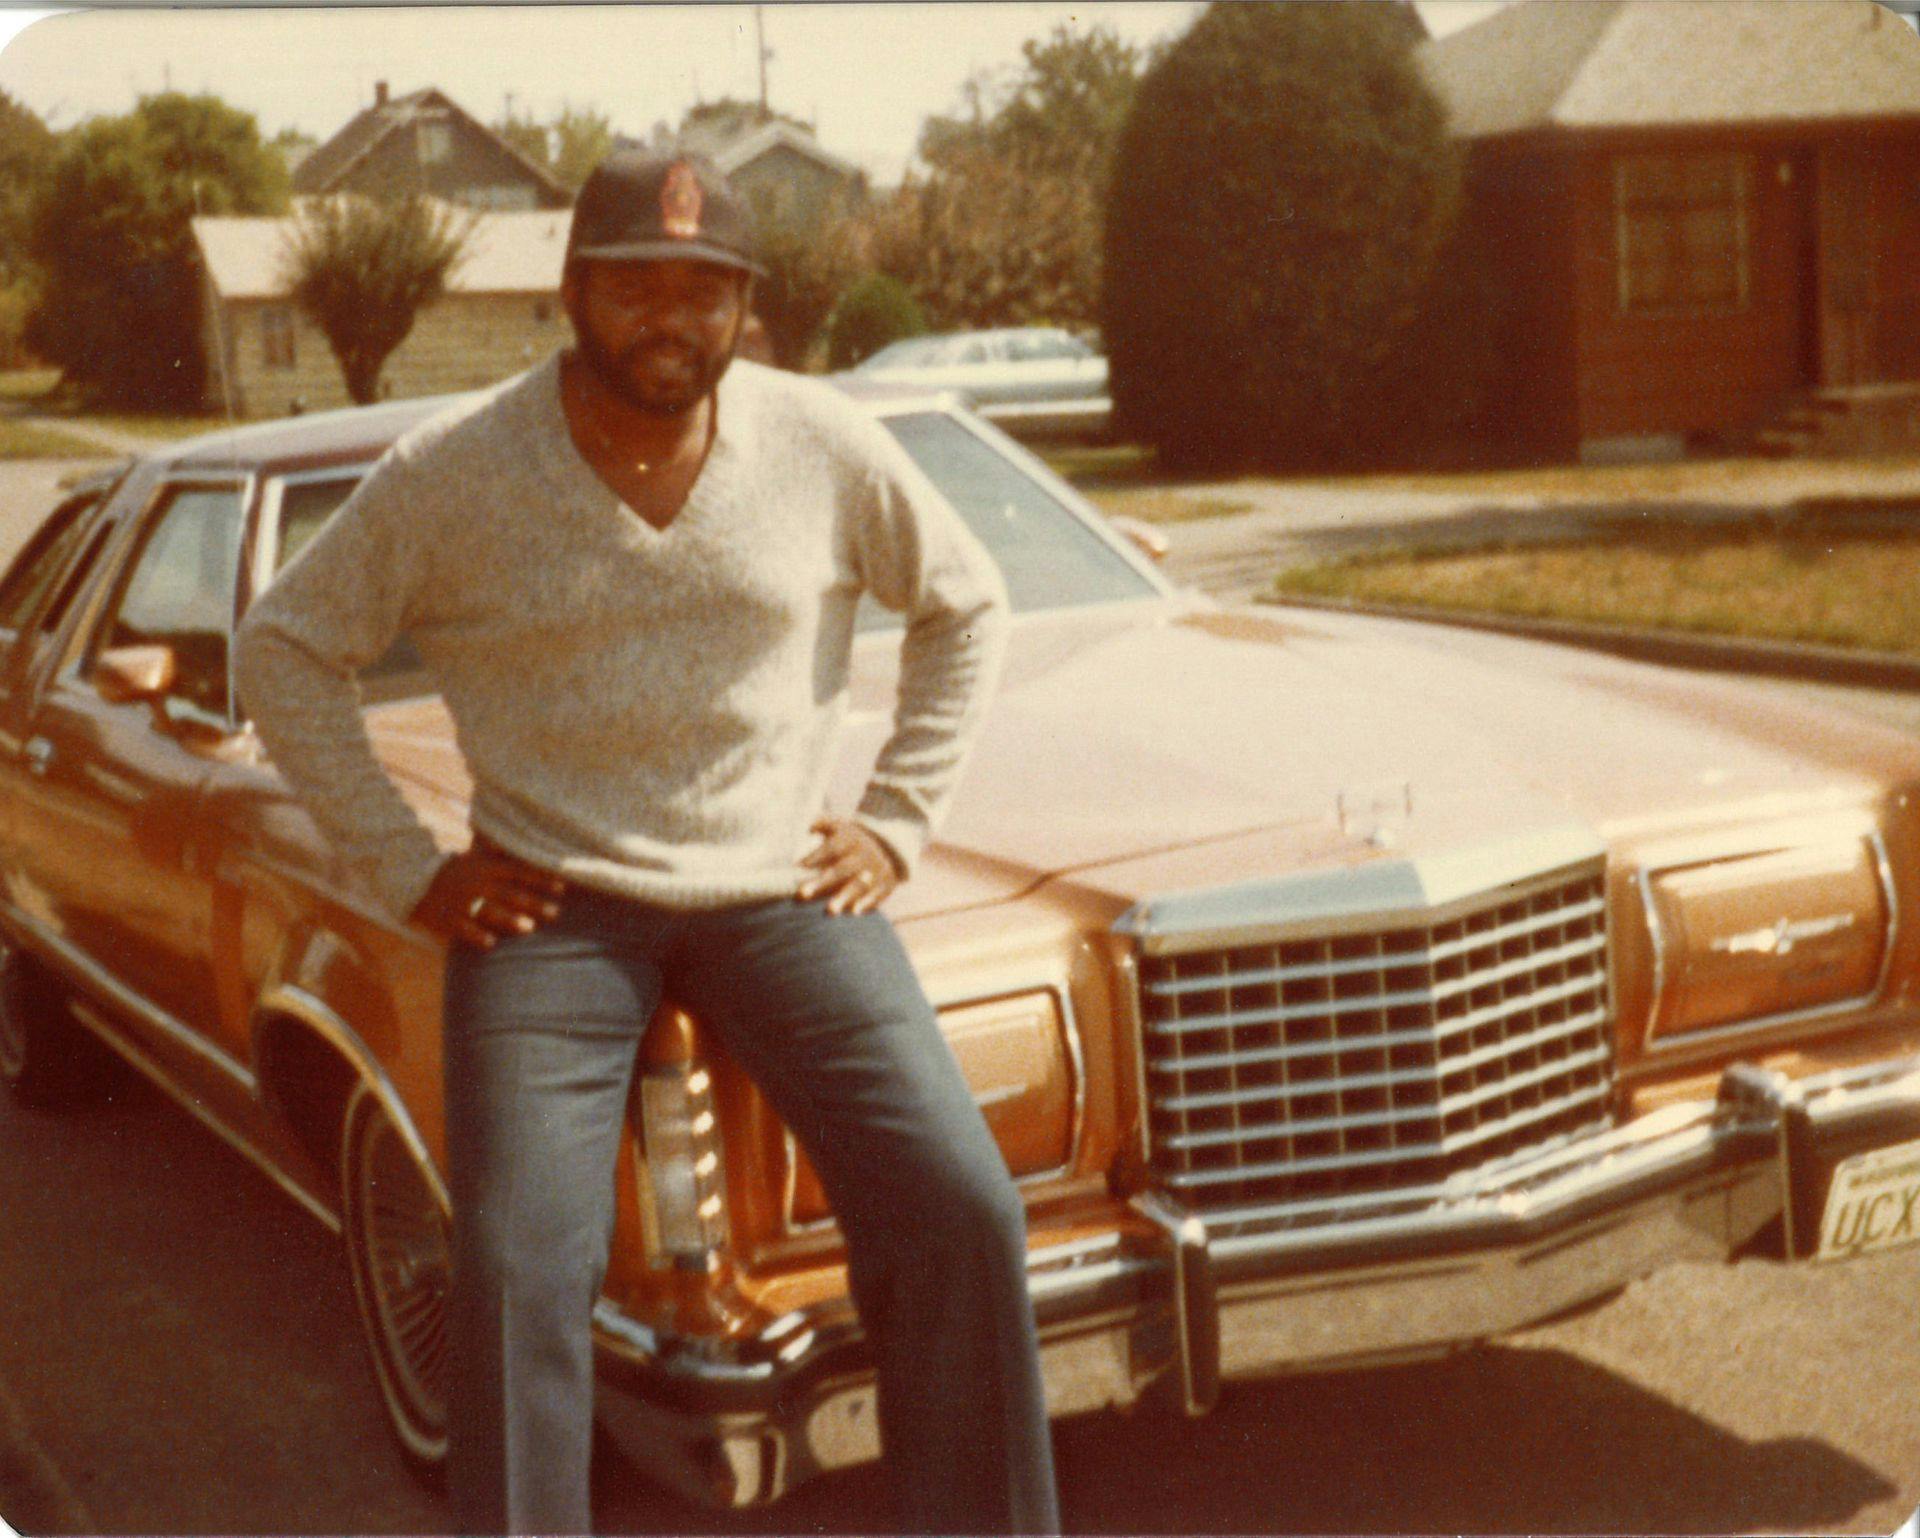 Robert L. Scott sits of the hood of a burnt umber-colored car wearing jeans, a v-neck sweater and a baseball cap